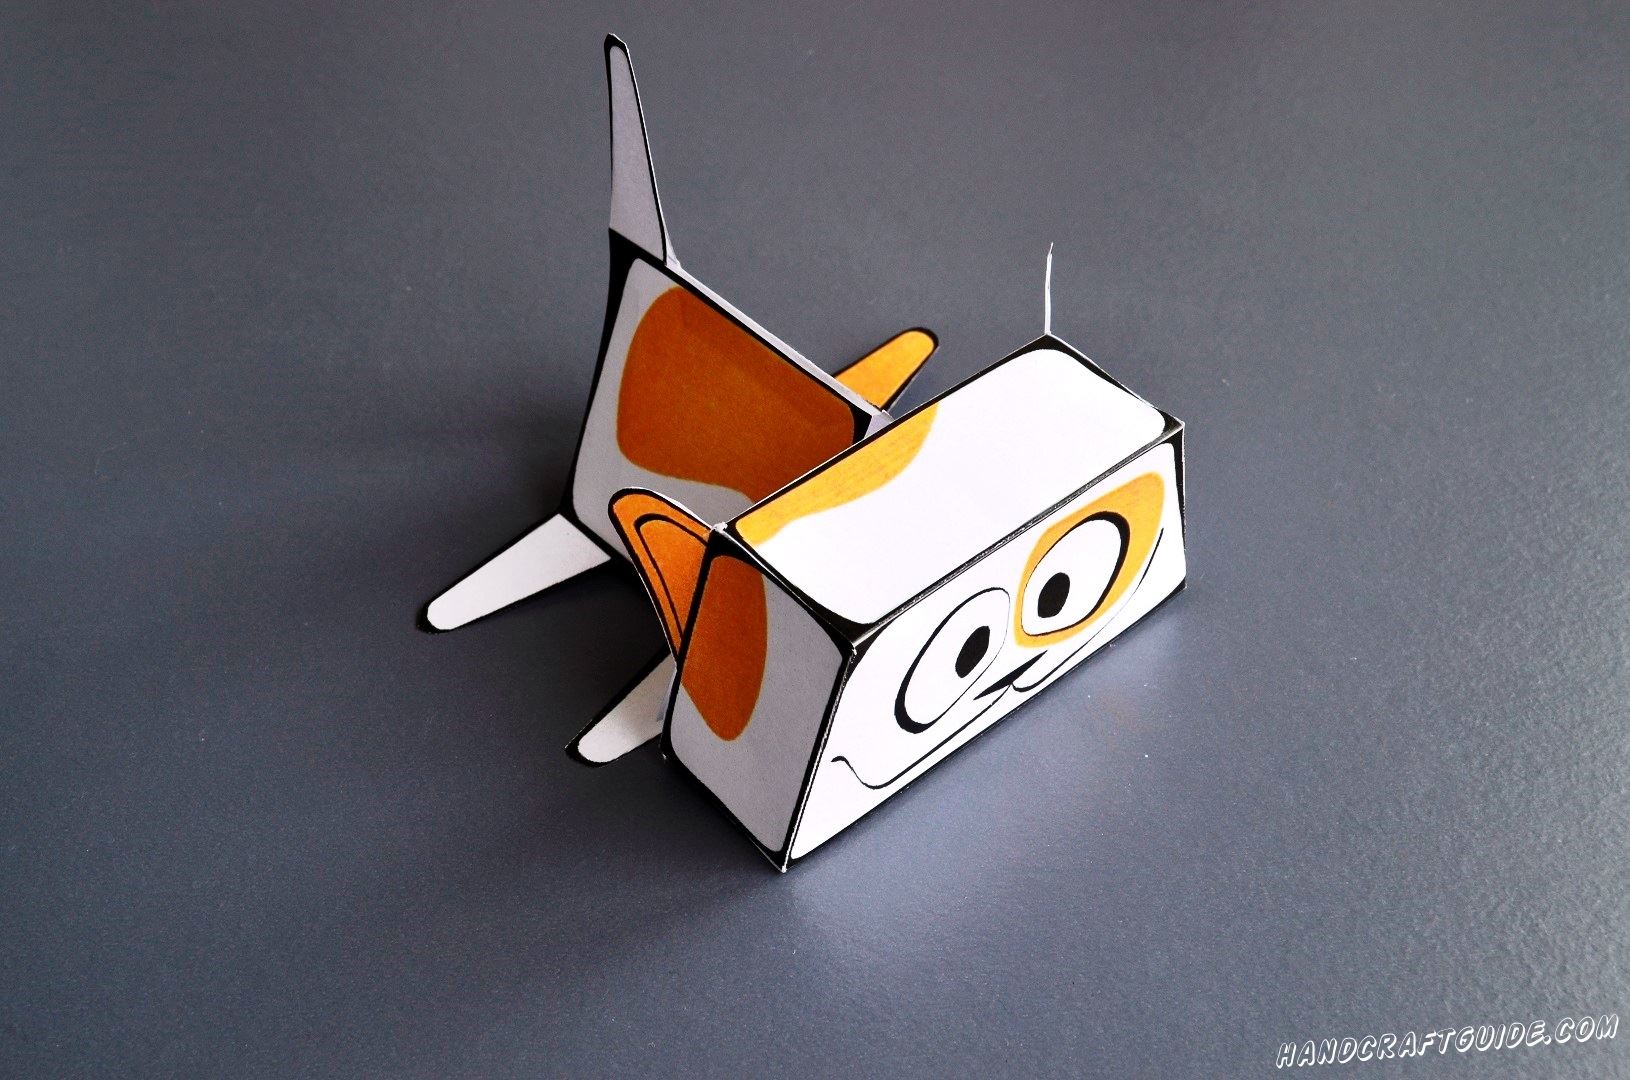 To make such a paper cat its very easy, need just download and print model of papercraft and follow the photo instructions